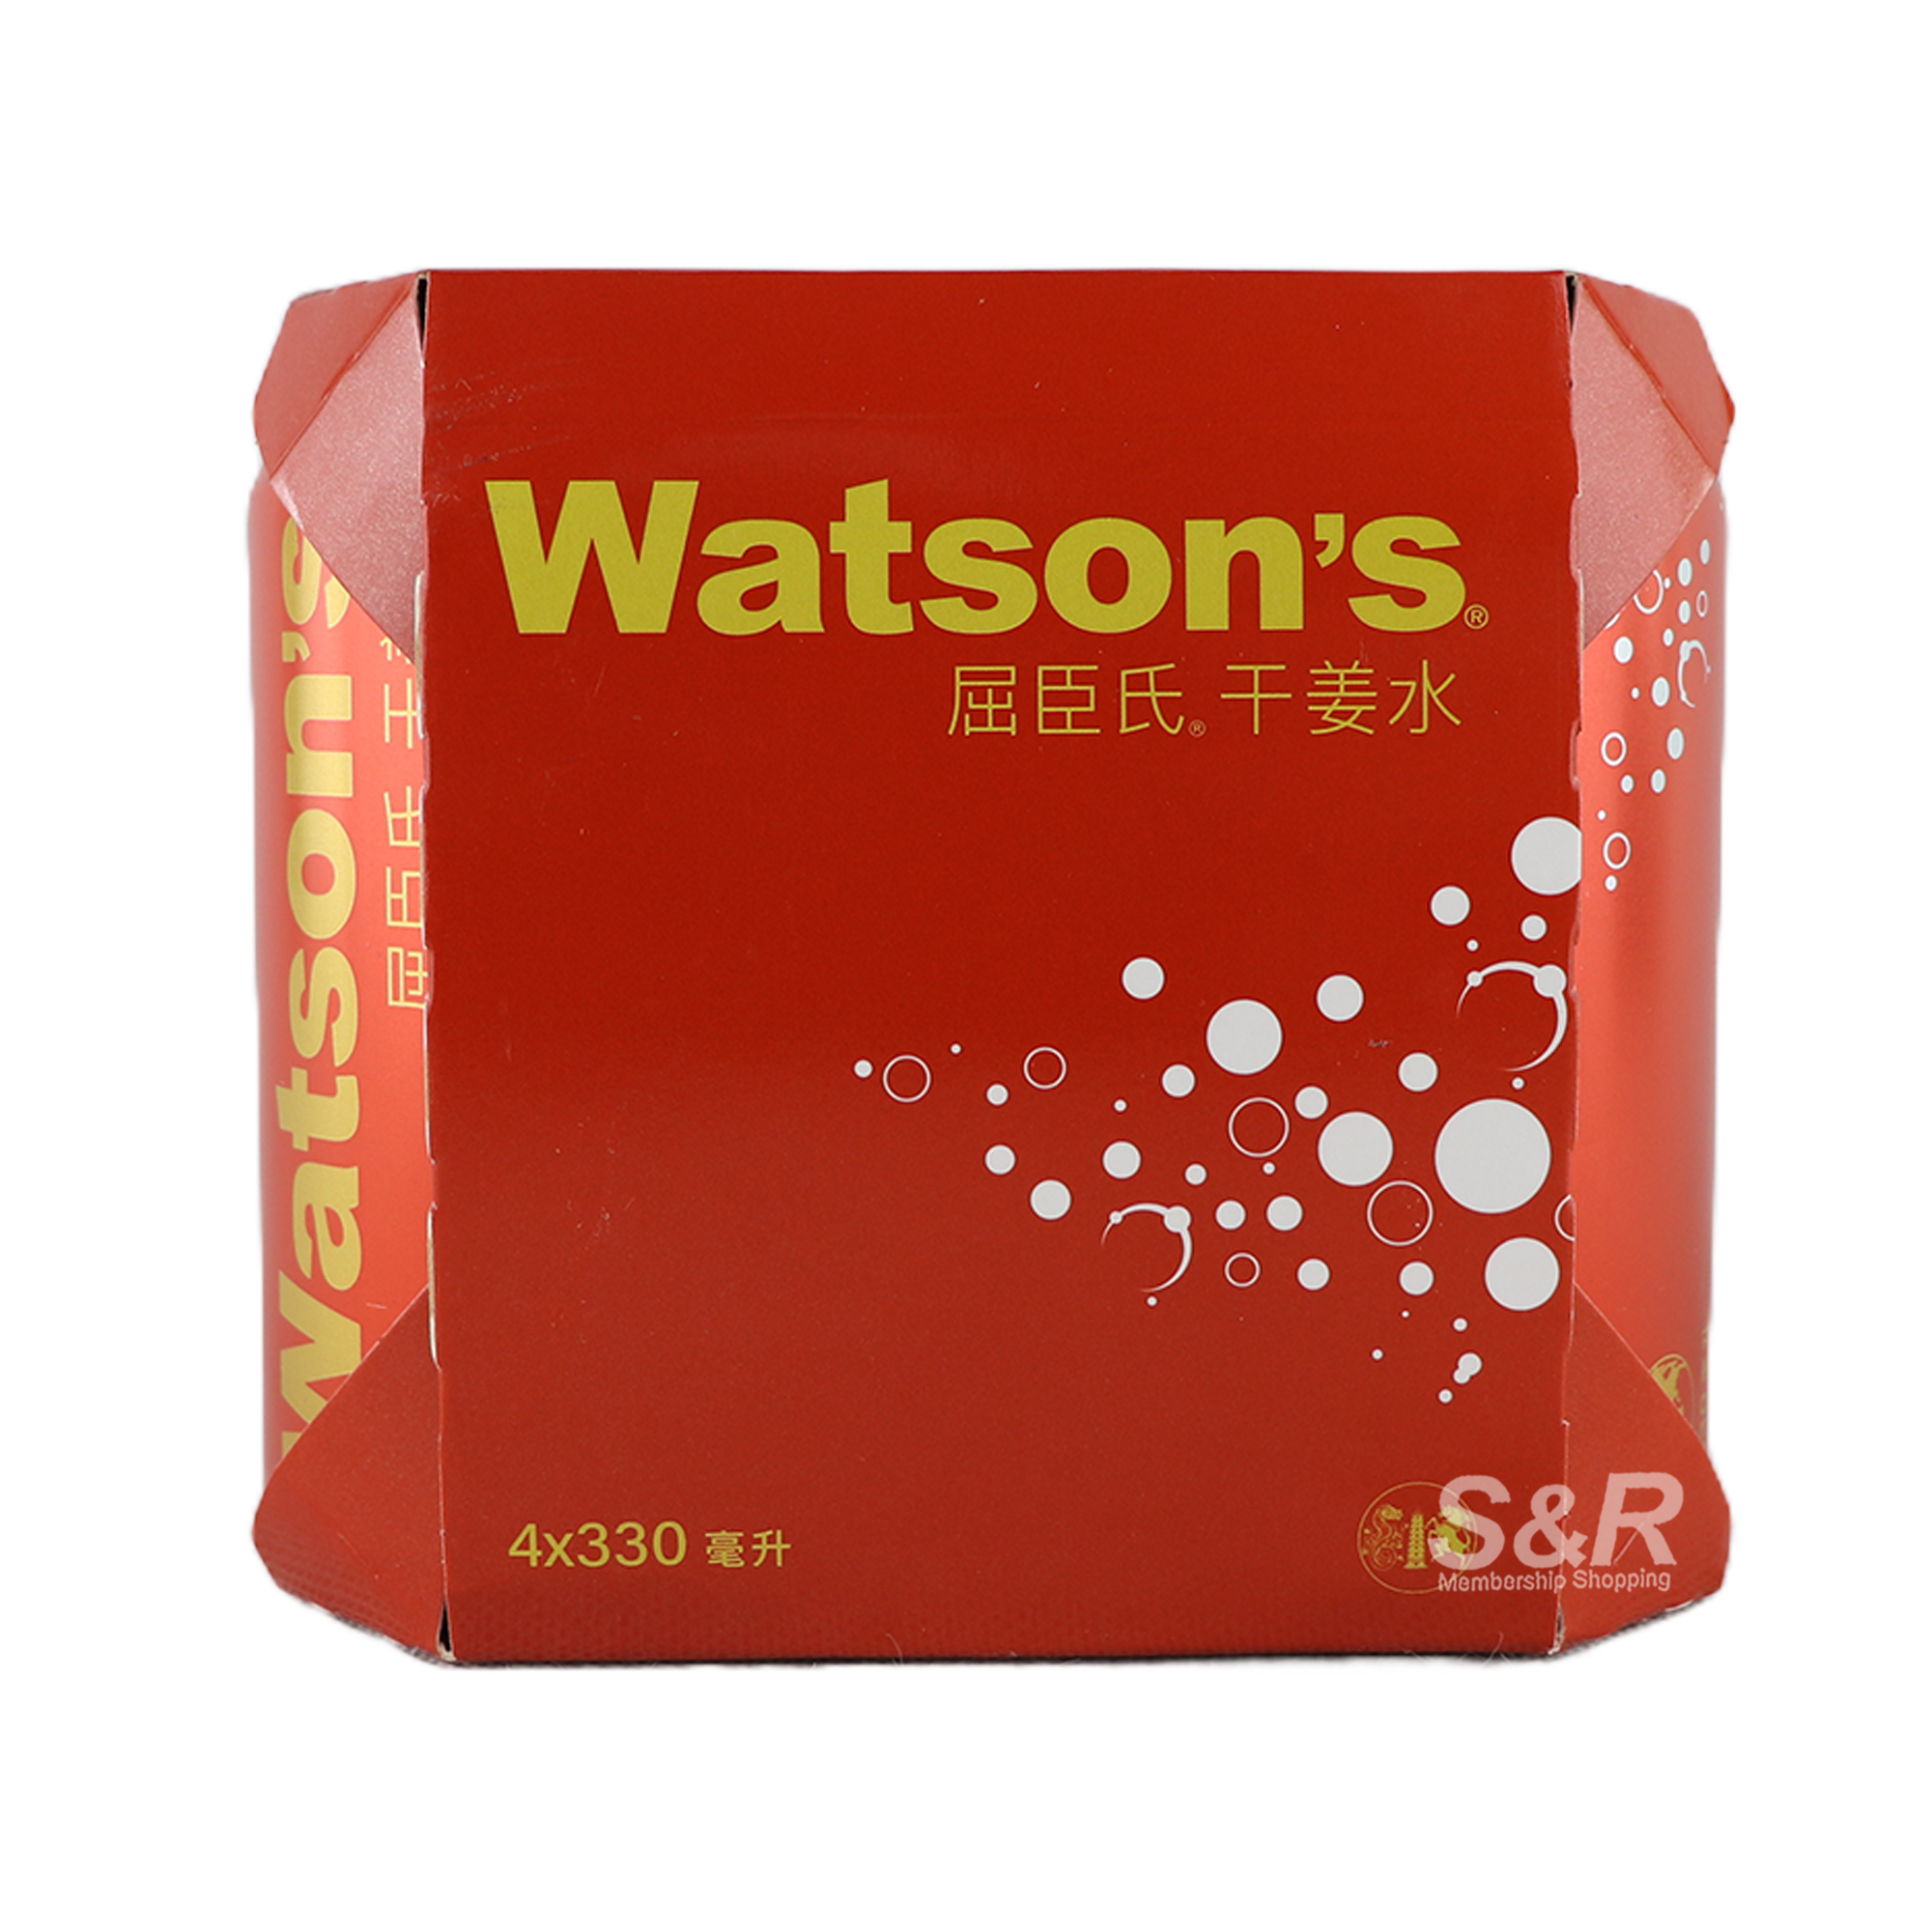 Watson's Ginger Ale 4 cans